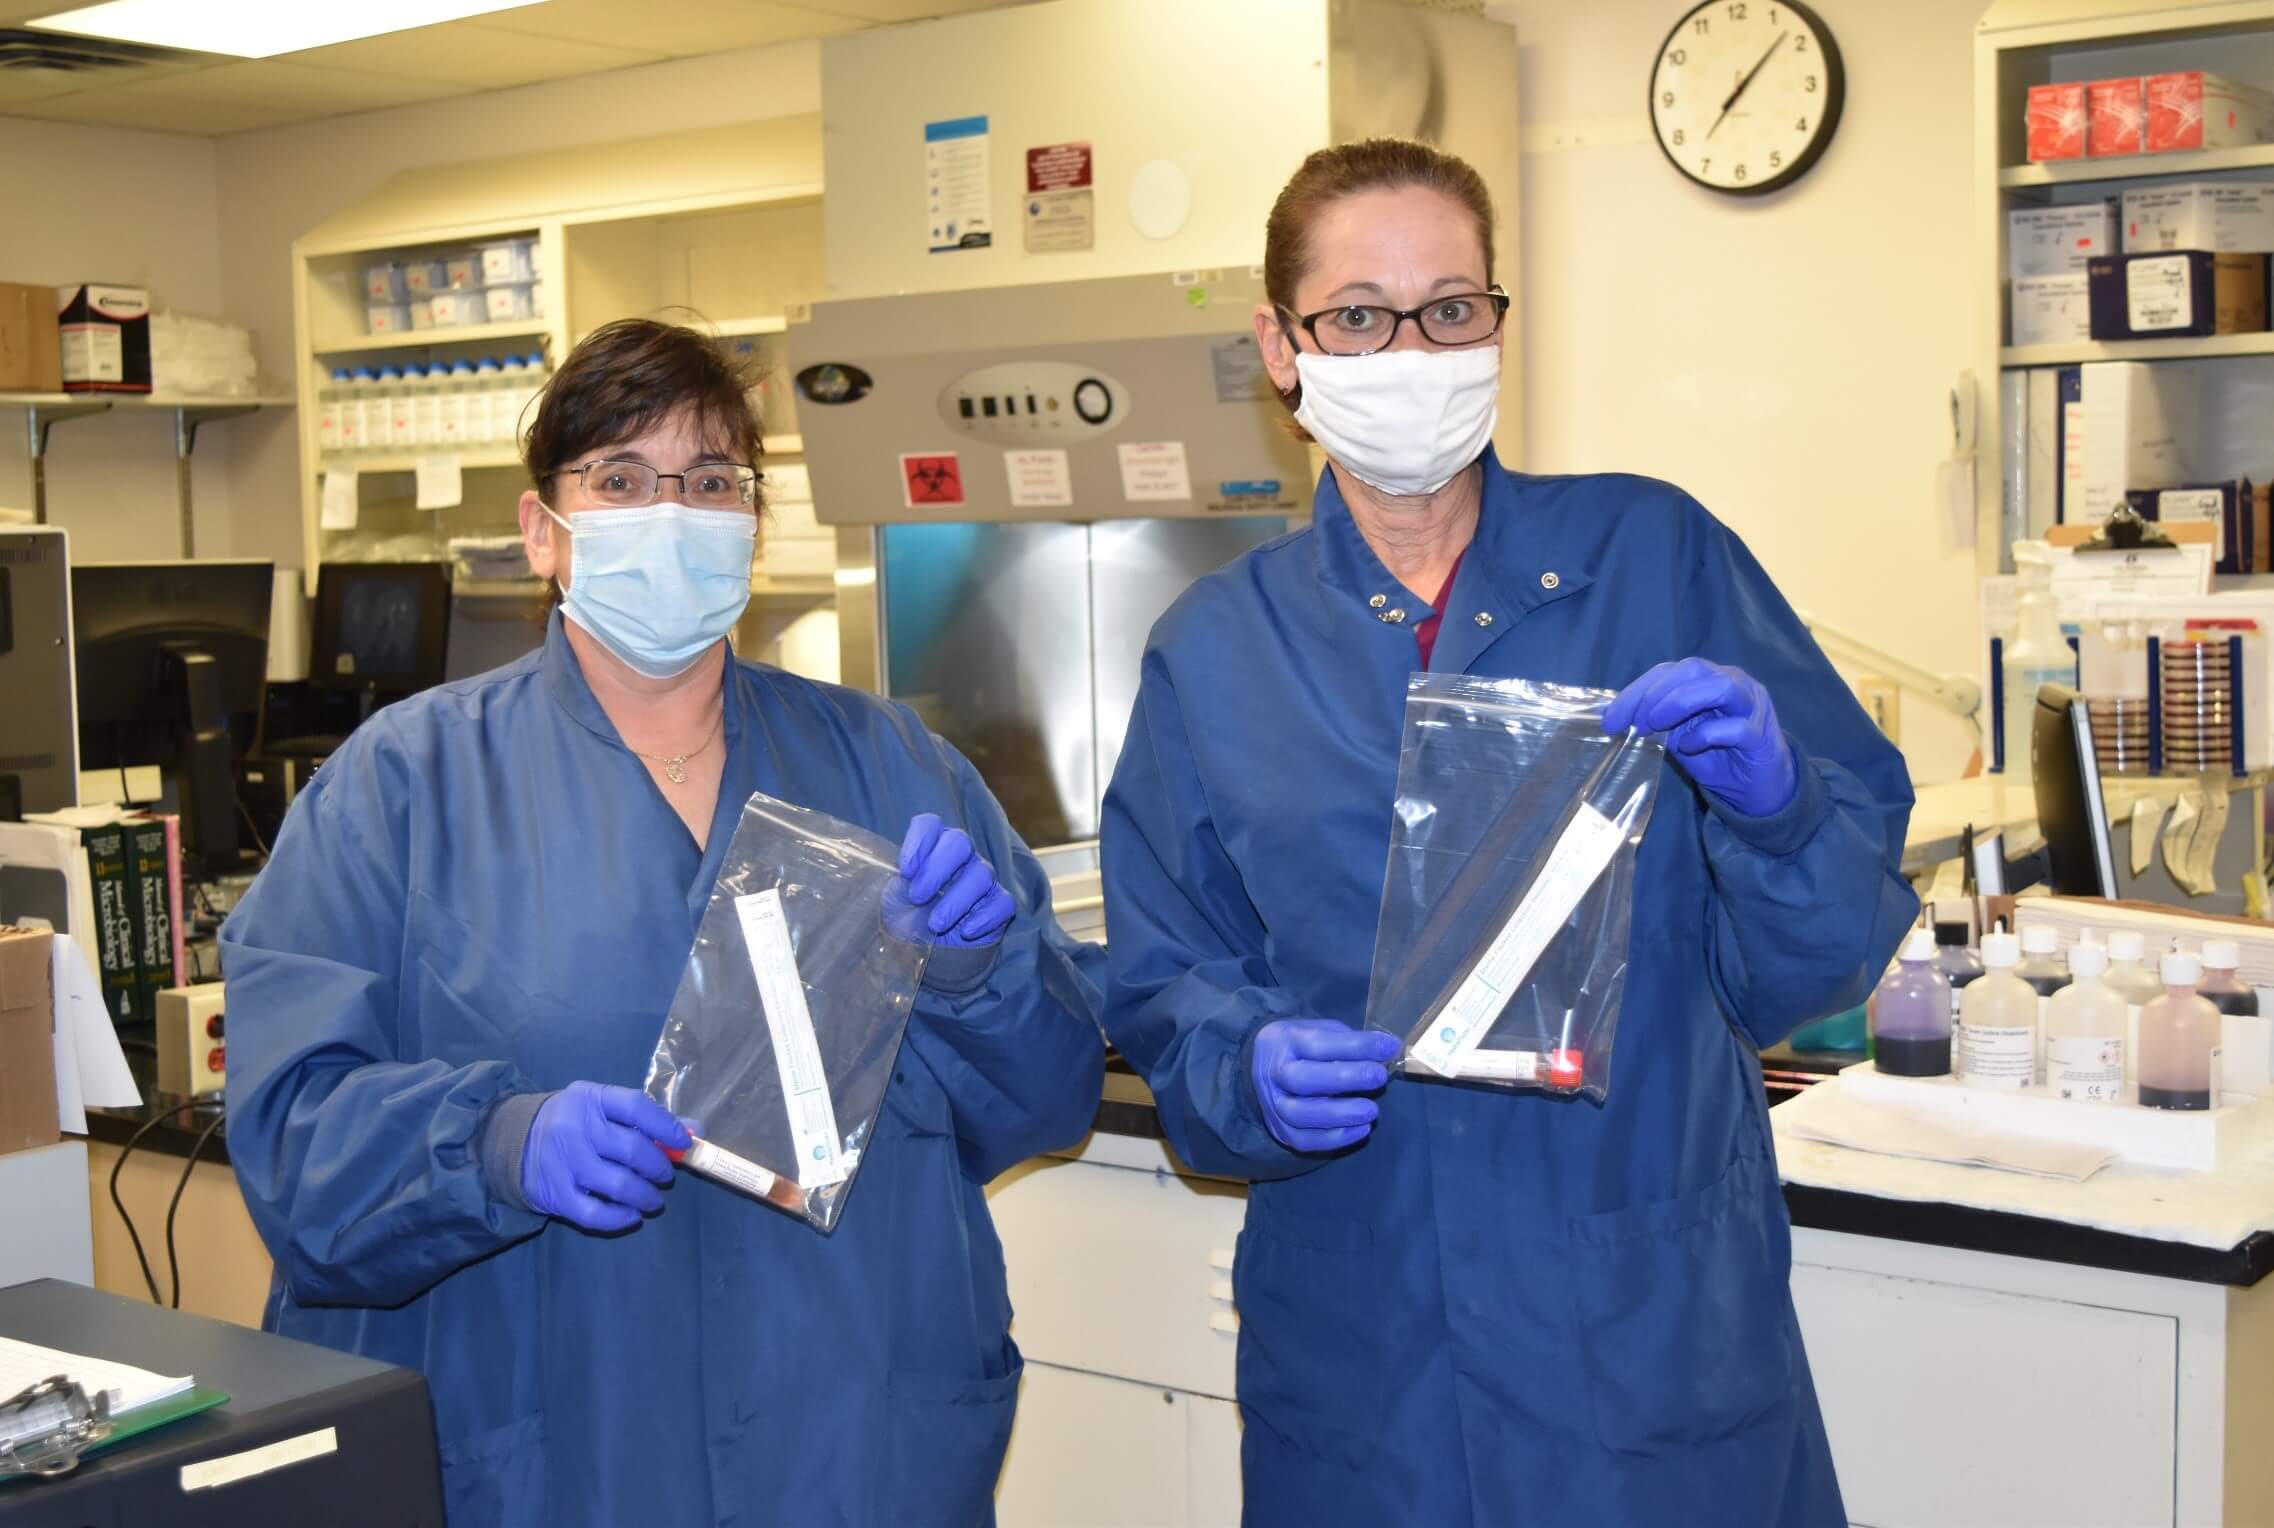 Two medical lab technologists at Cape Regional Medical Center collected samples for COVID-19 testing. Hospital staff wear protective equipment to limit their exposure to the virus.